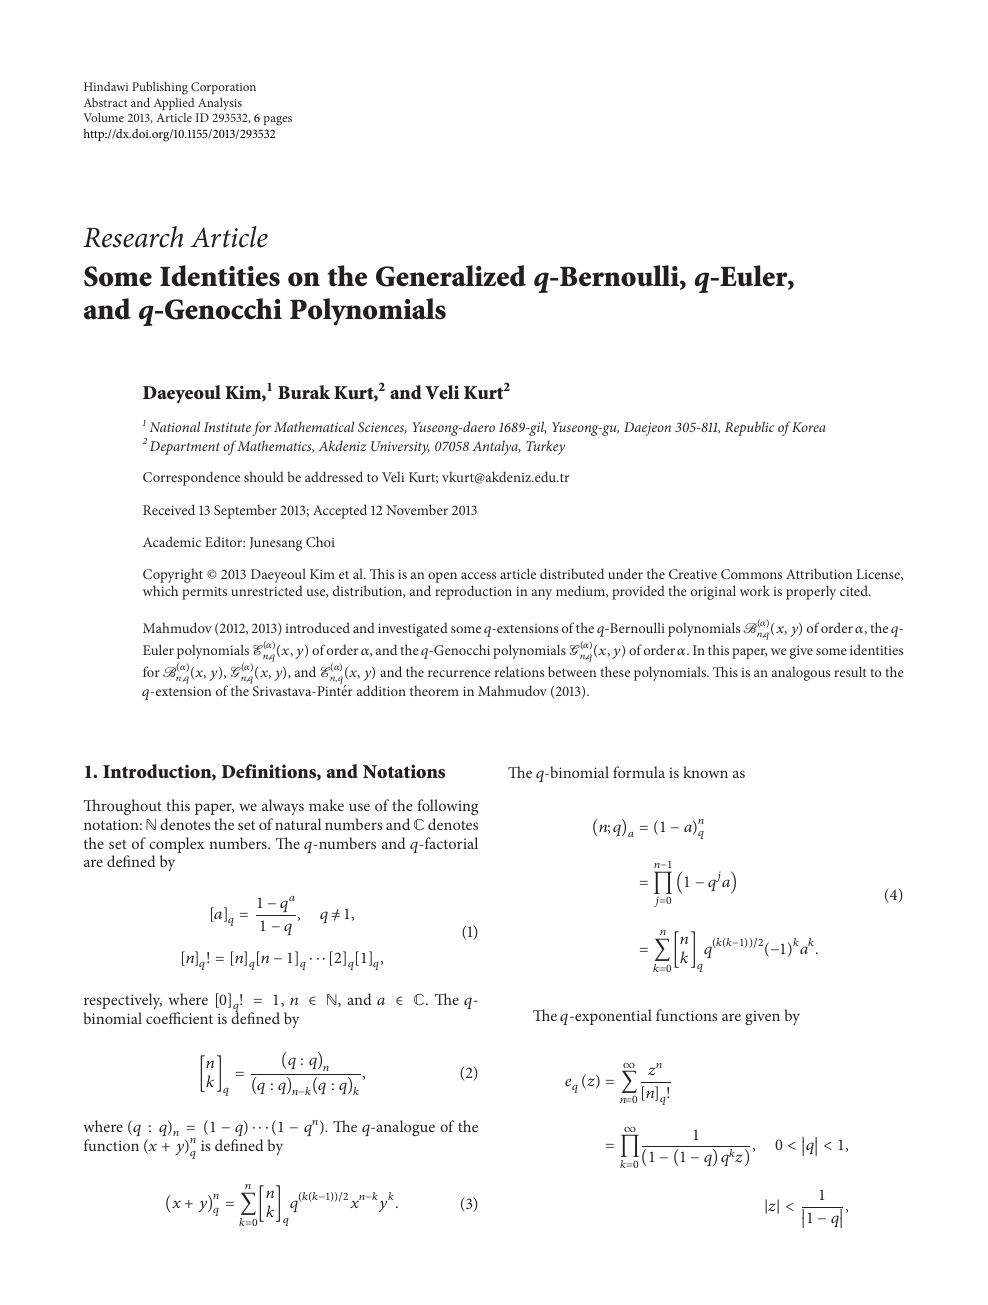 Some Identities On The Generalized Q Bernoulli Q Euler And Q Genocchi Polynomials Topic Of Research Paper In Mathematics Download Scholarly Article Pdf And Read For Free On Cyberleninka Open Science Hub